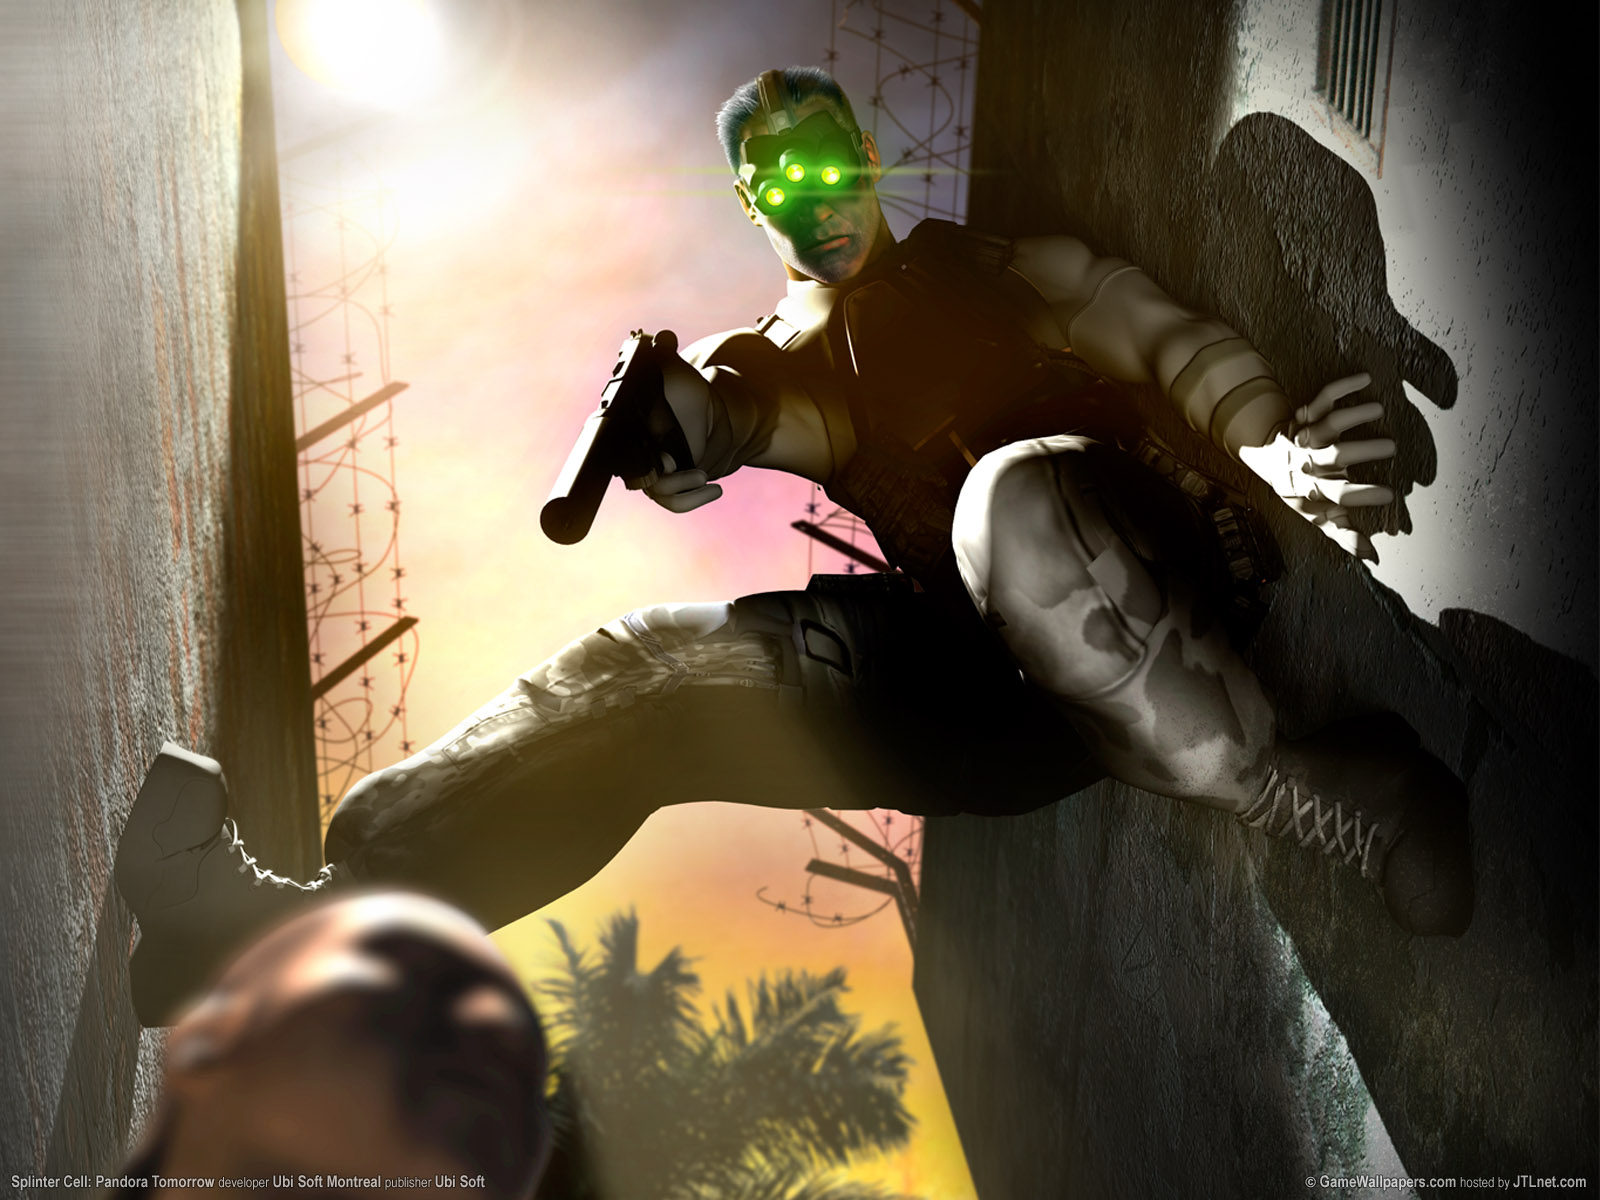 Splinter Cell Double Agent in HD with Full Resolution tutorial - Mod DB